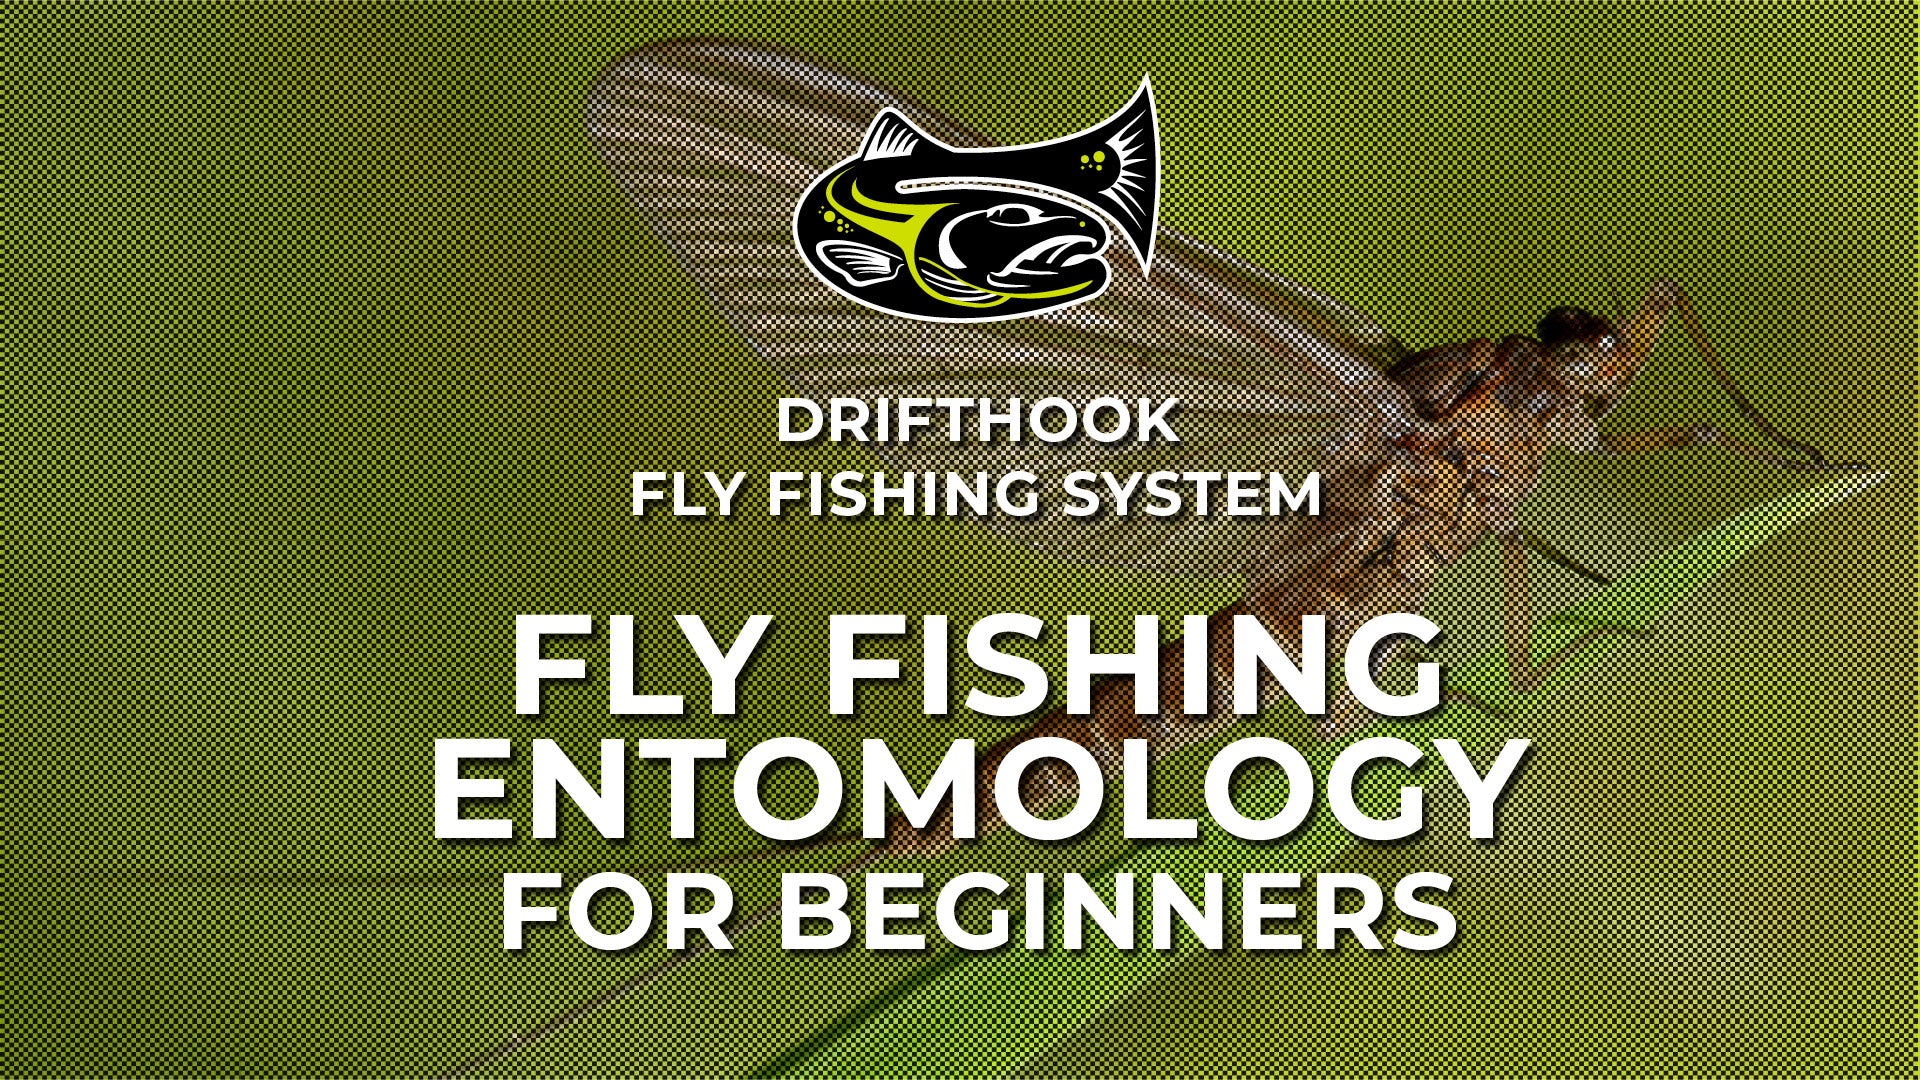 Fly Fishing Entomology for Beginners